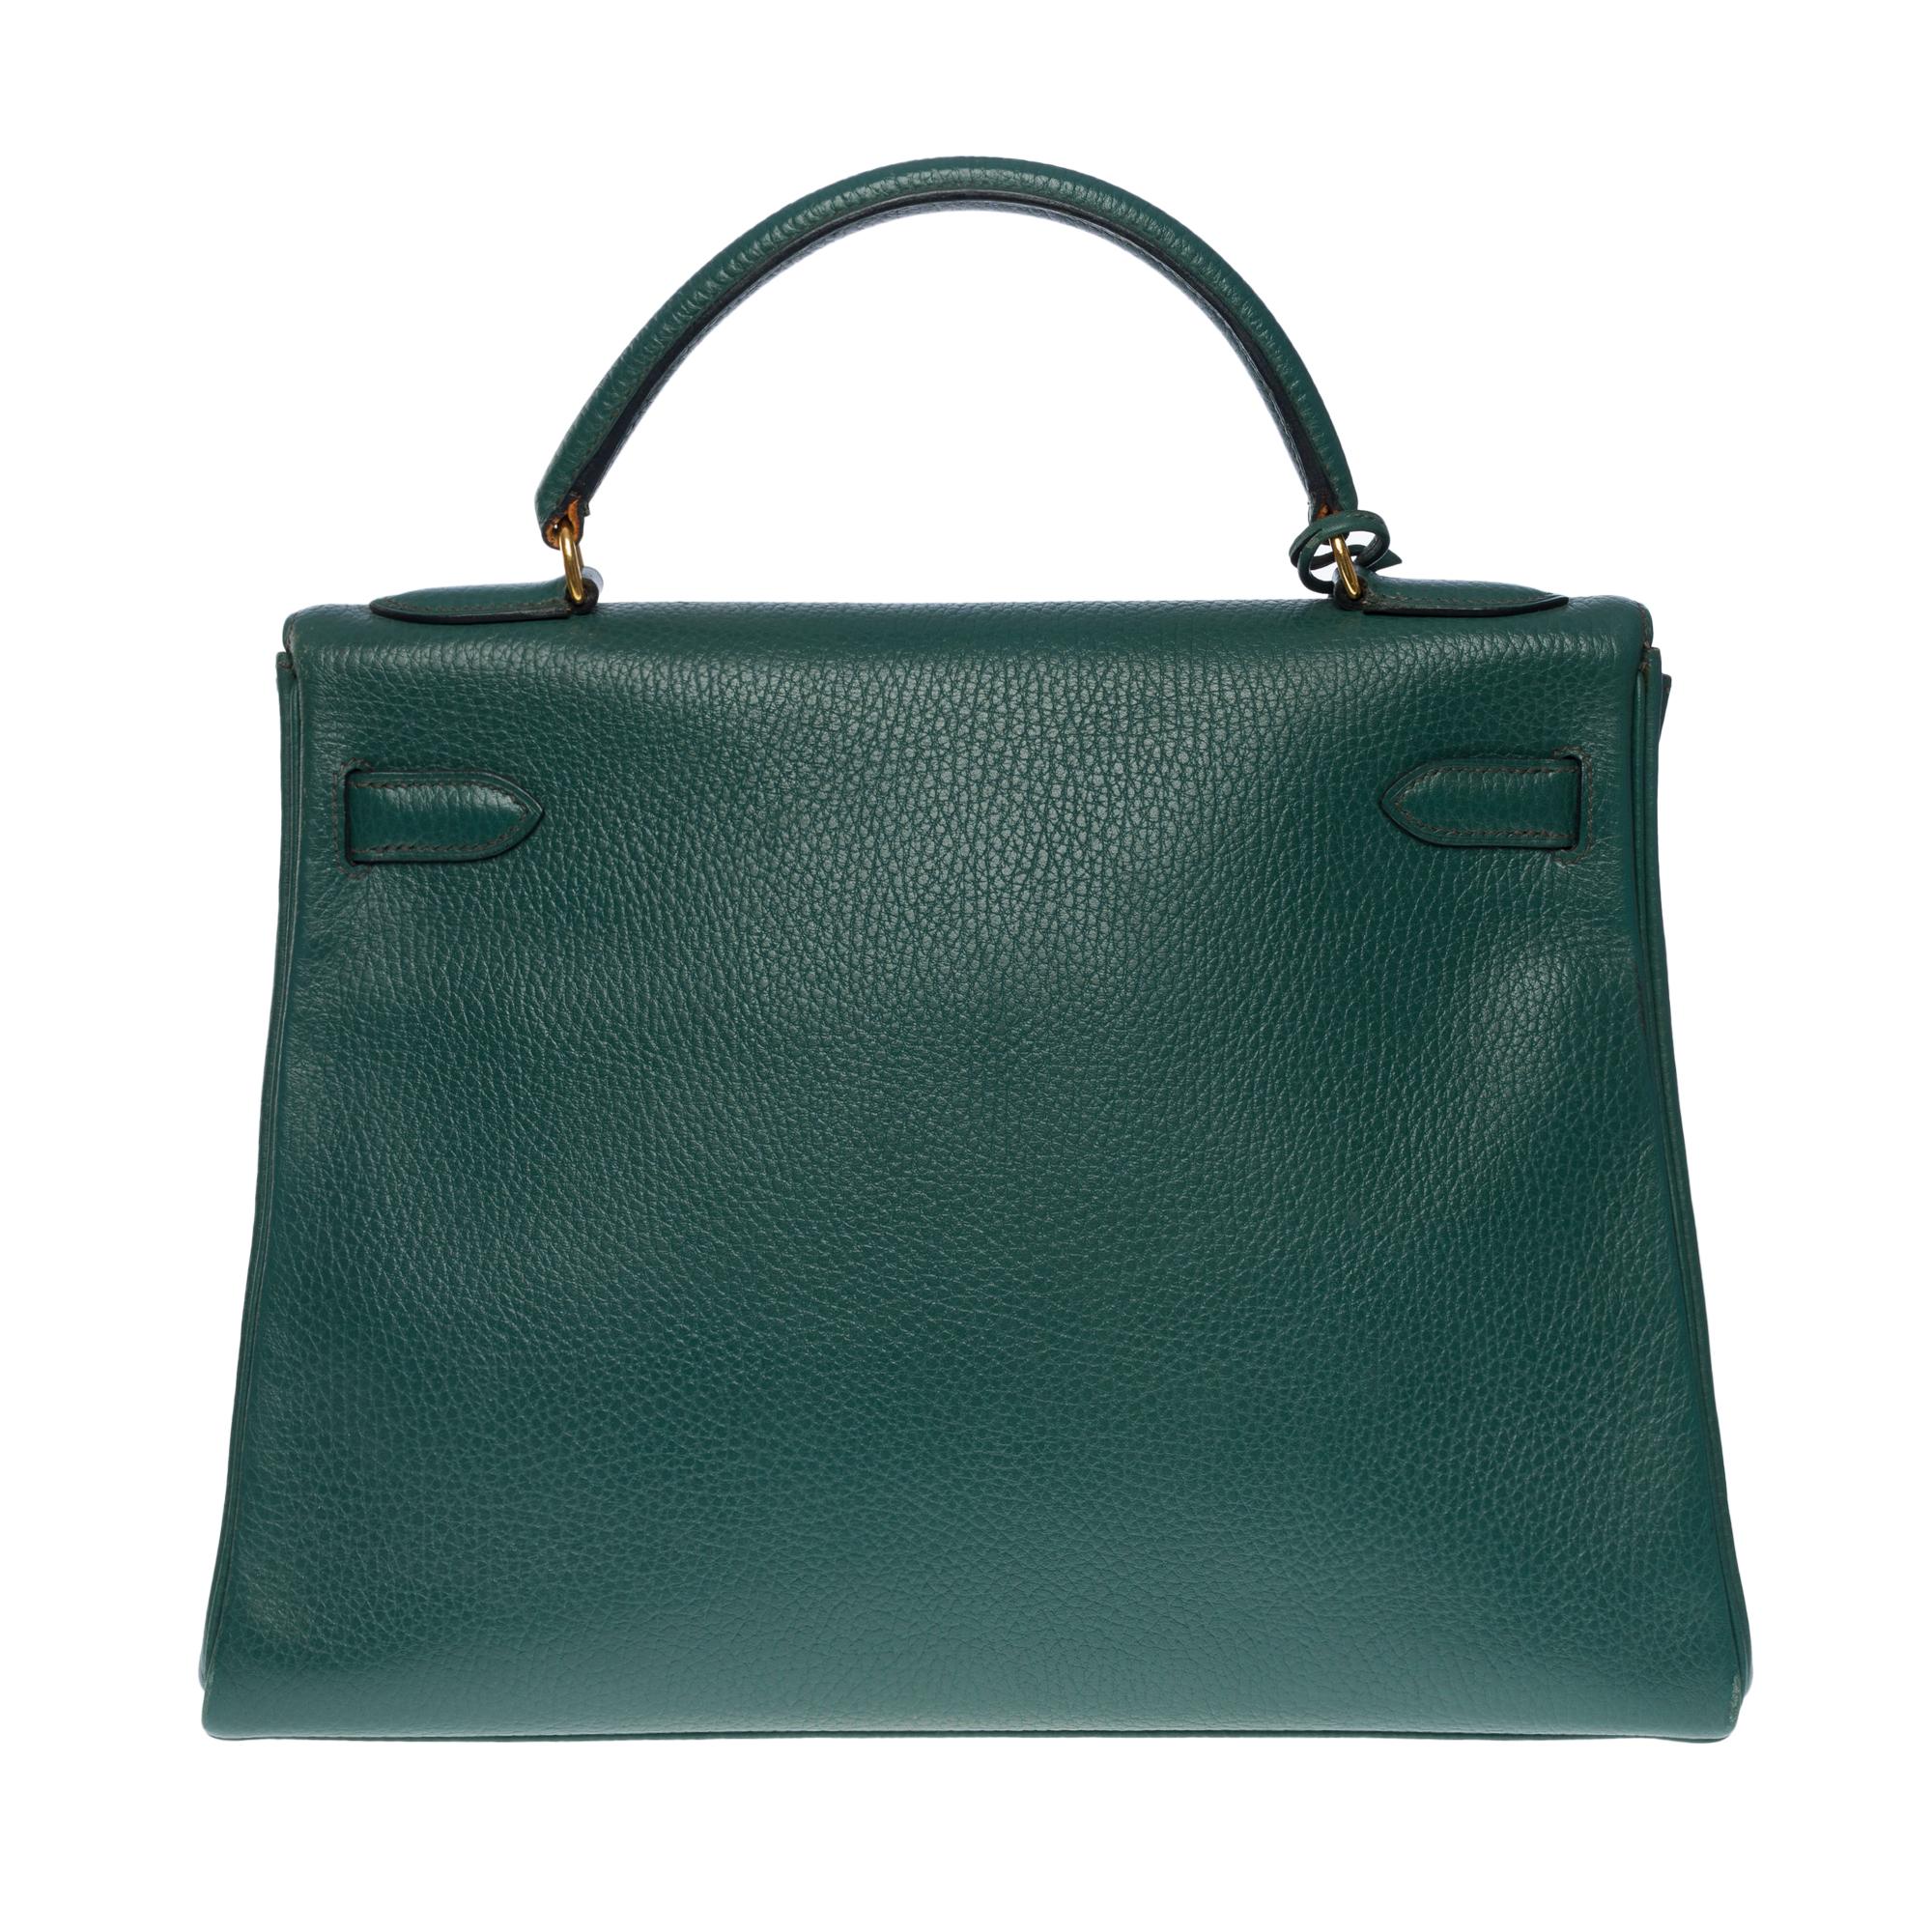 Rare and in one of the most precious leathers of the house Hermès: Hermes Kelly 32 handbag returned strap in Vert Malachite Vache Ardennes leather, gold plated metal hardware, green leather handle, removable shoulder strap in green leather allowing